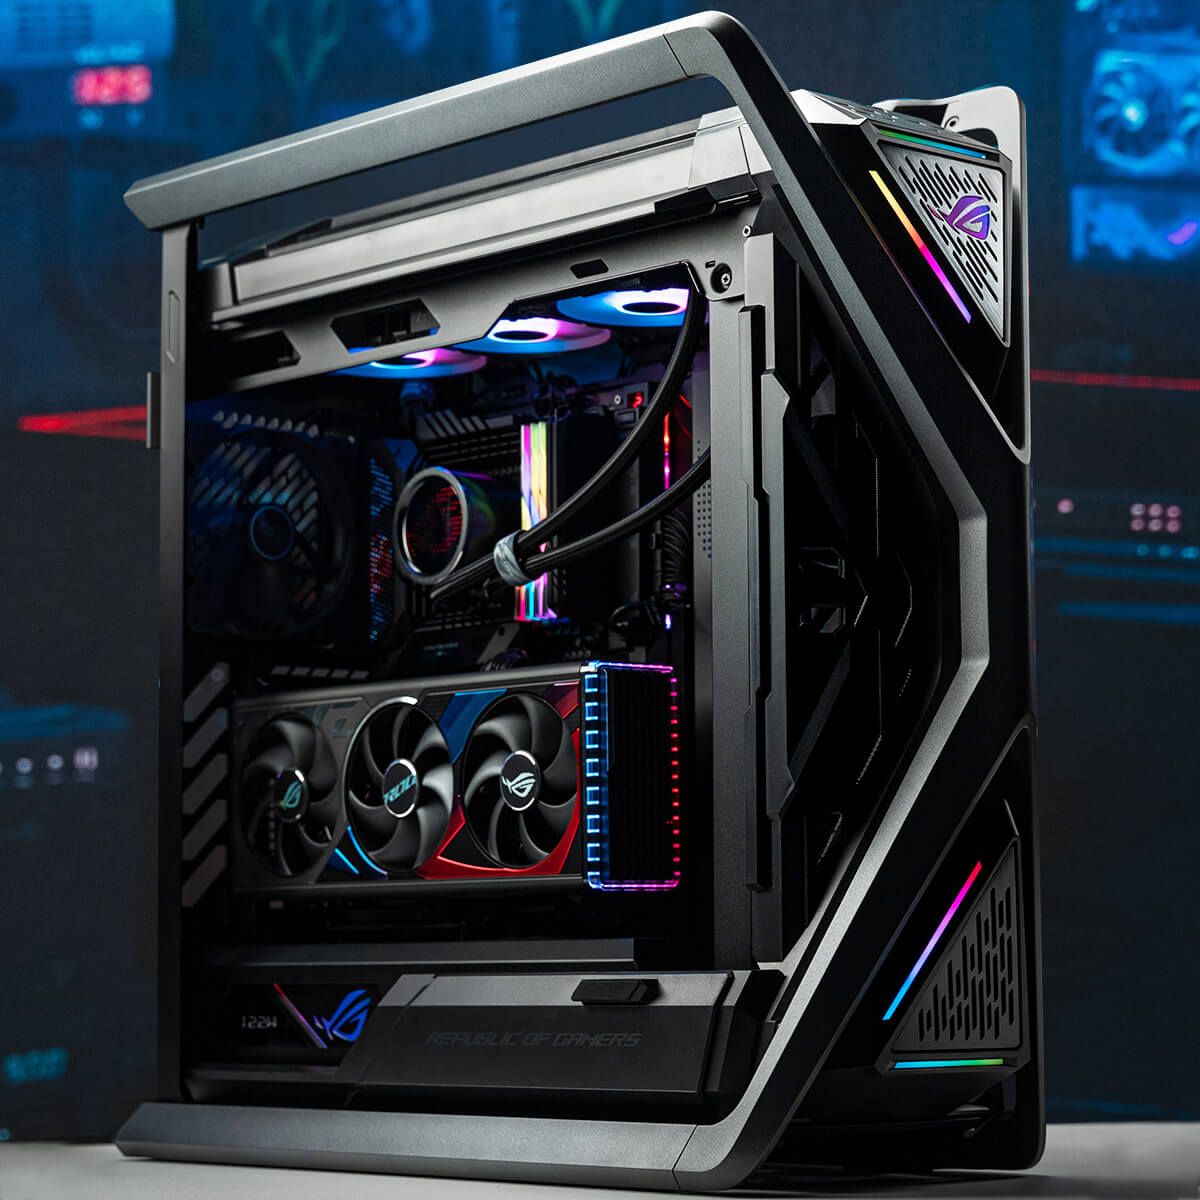 Angled-view of a full ROG PC build with ROG components attached 